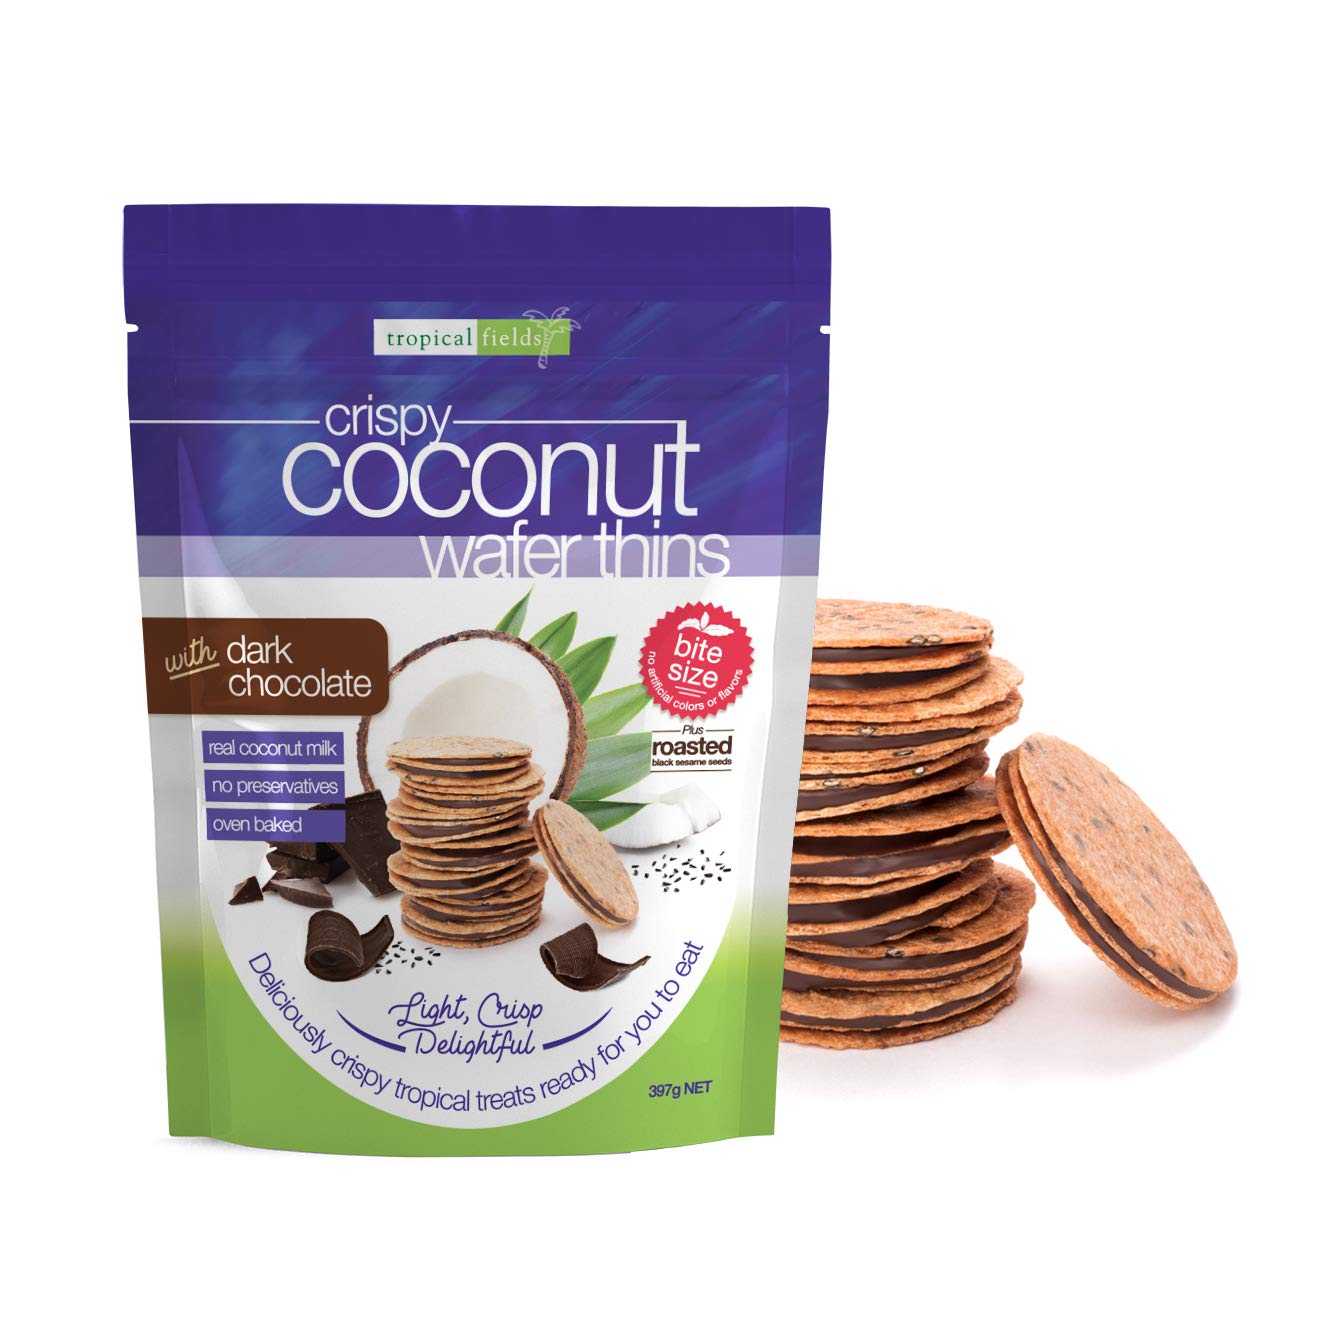 Coconut Wafer Thins with Dark Chocolate, Tropical Fields (397g)